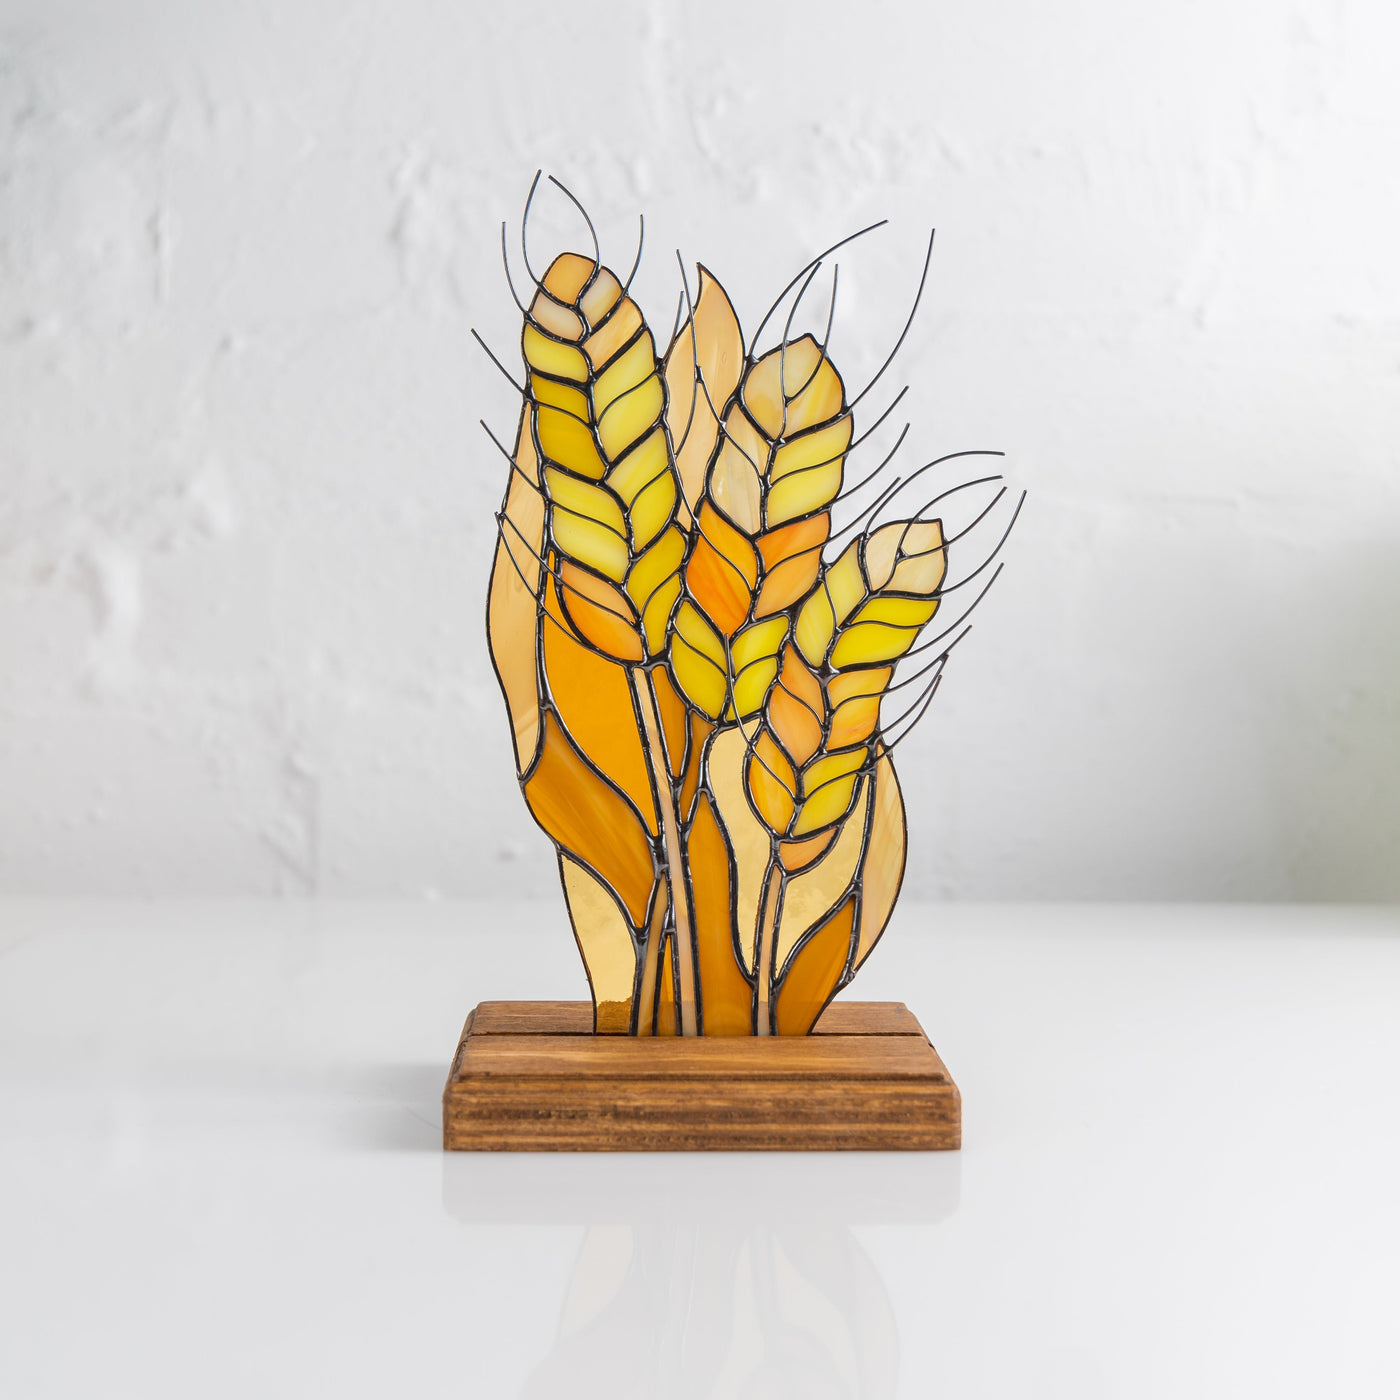 Yellow wheat stained glass panel for table decor